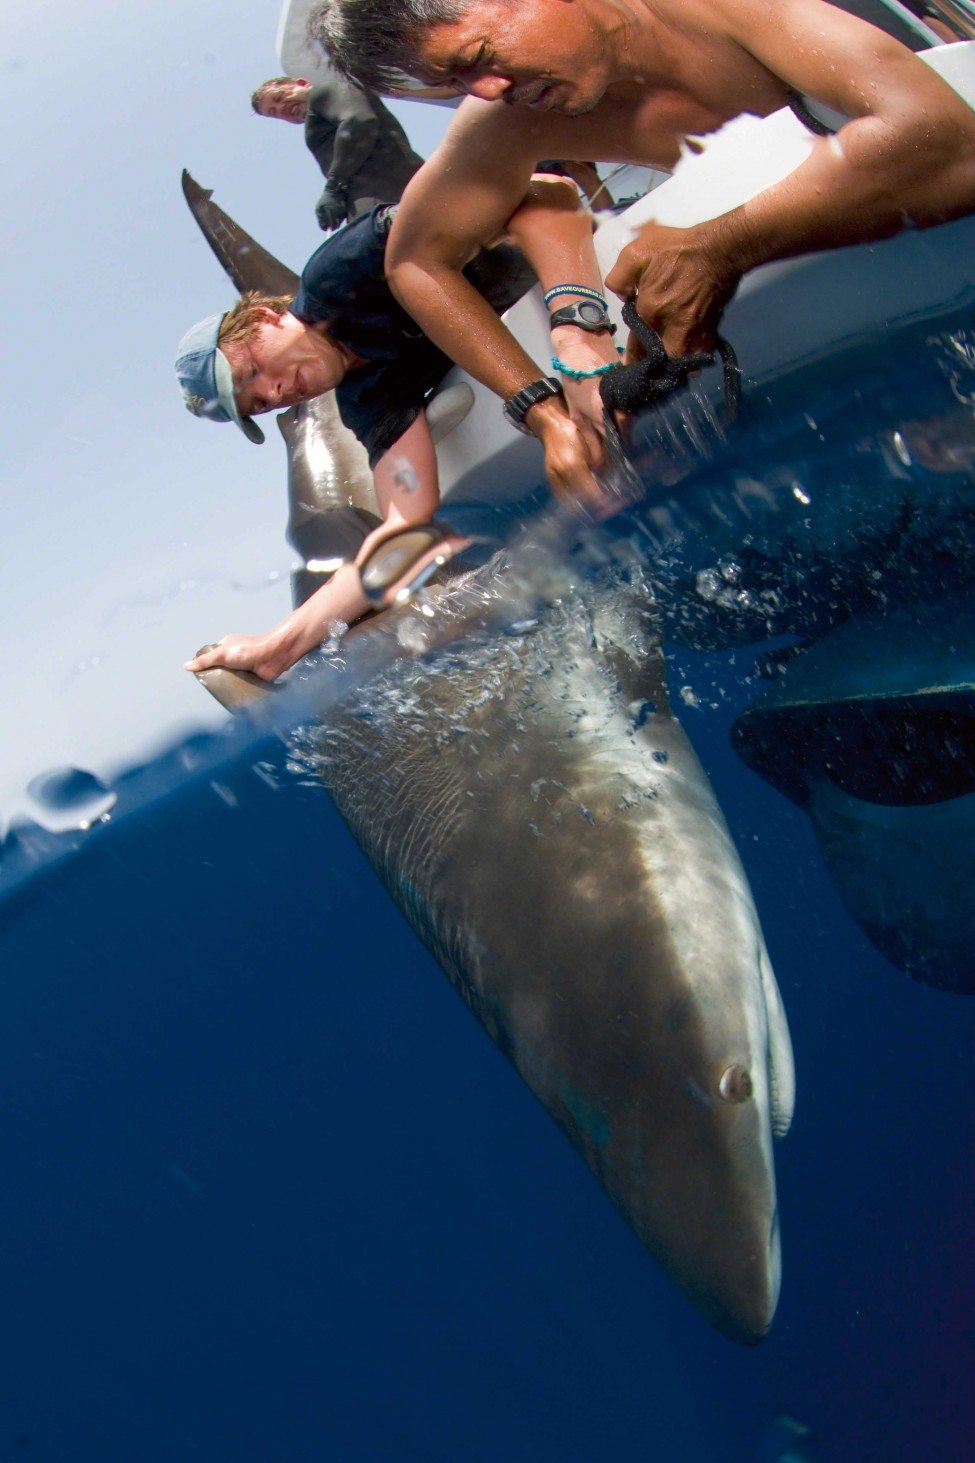 James Lea has worked with sharks in locations across the Indian Ocean, but he thinks D’Arros Island and St Joseph Atoll could offer a special refuge for sharks. Here he tags and measures a silky shark in the Red Sea.<br />
Photo by Dan Beecham | Danah Divers Copyright